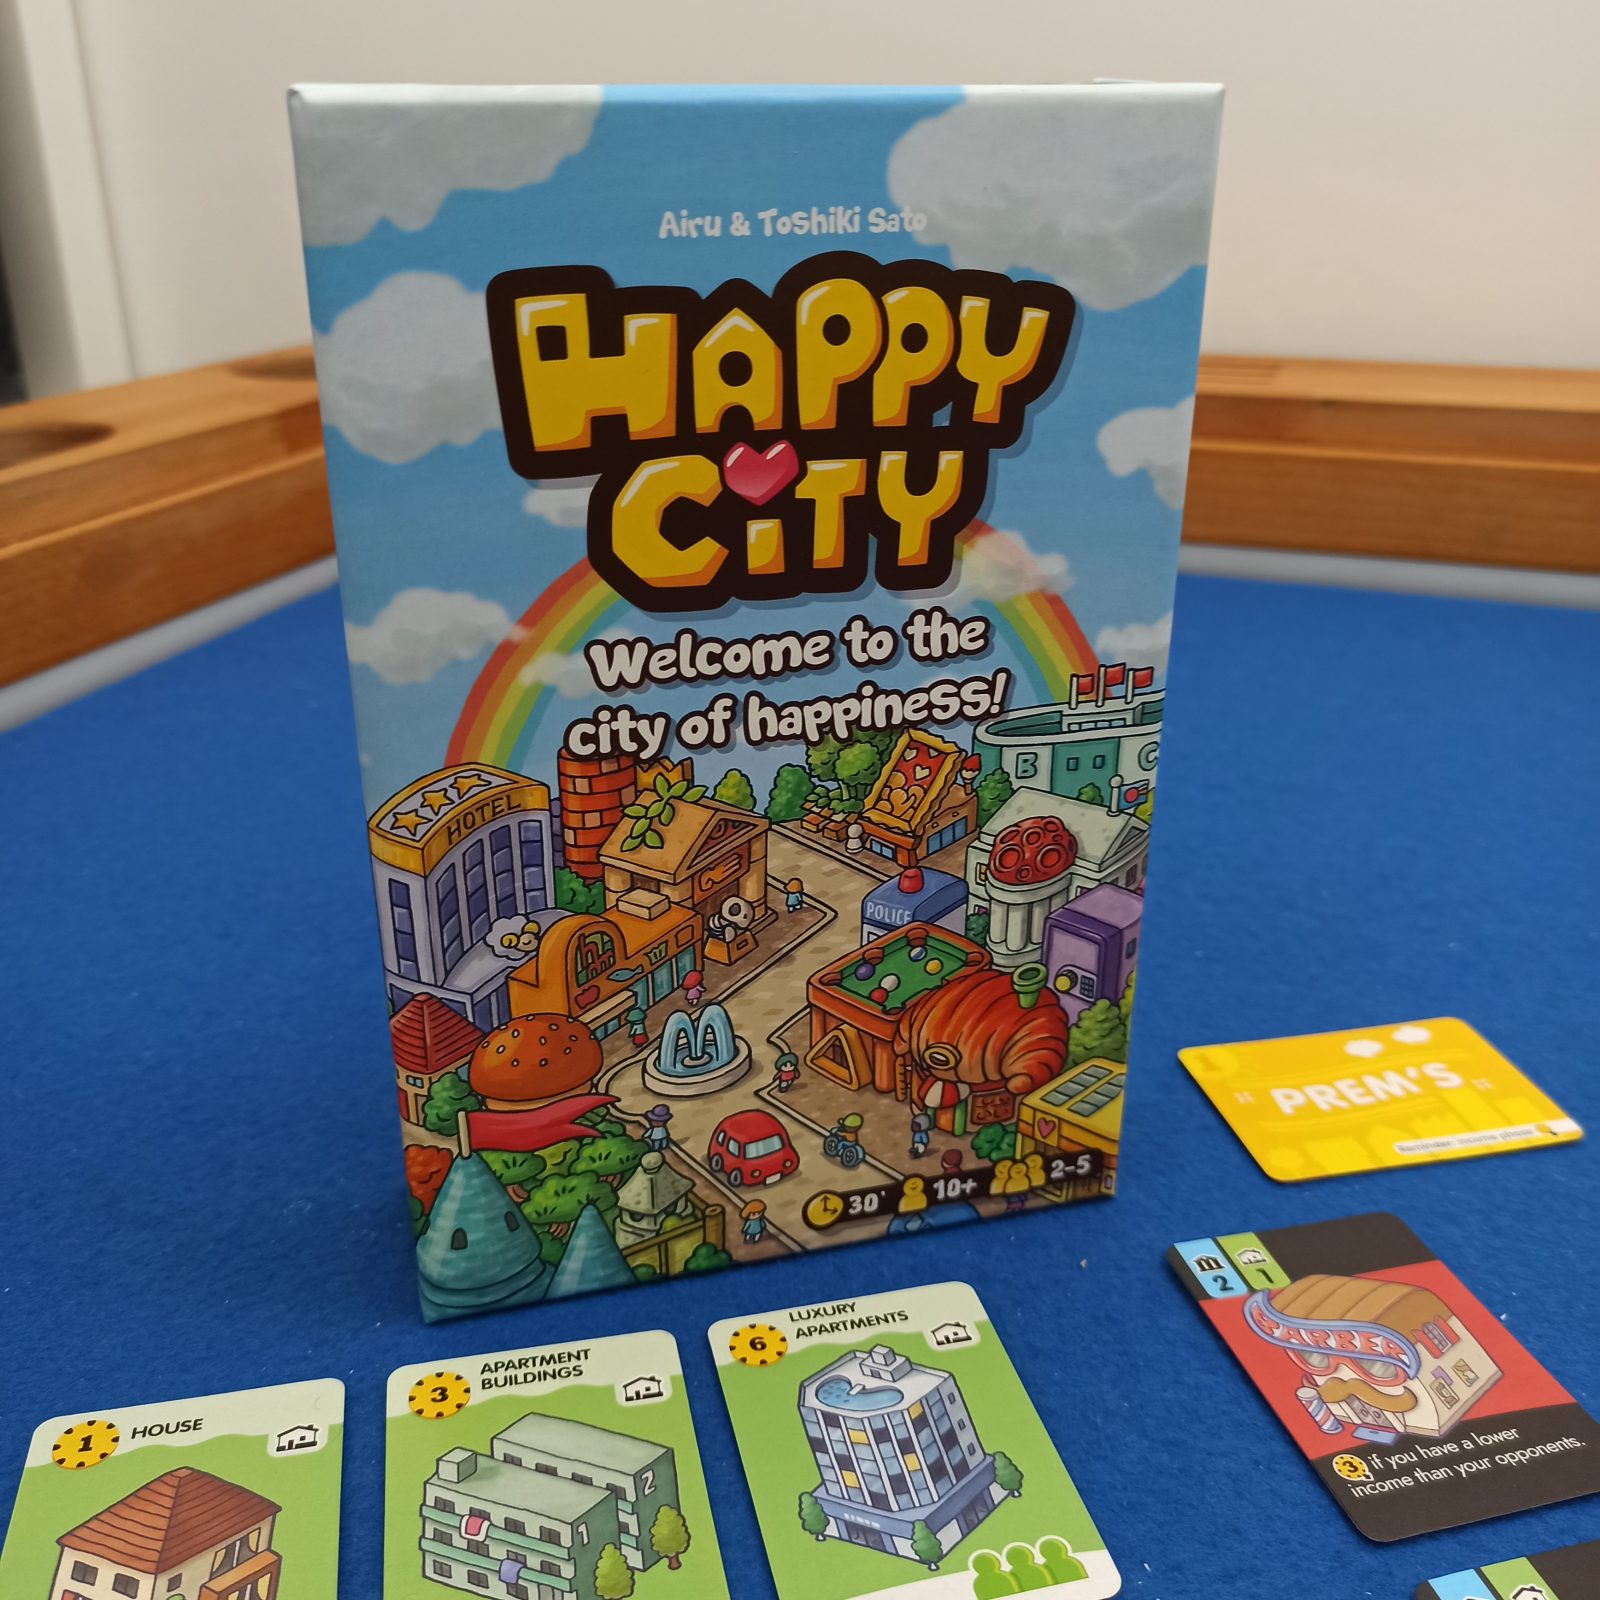 Happy City - Cocktail Games